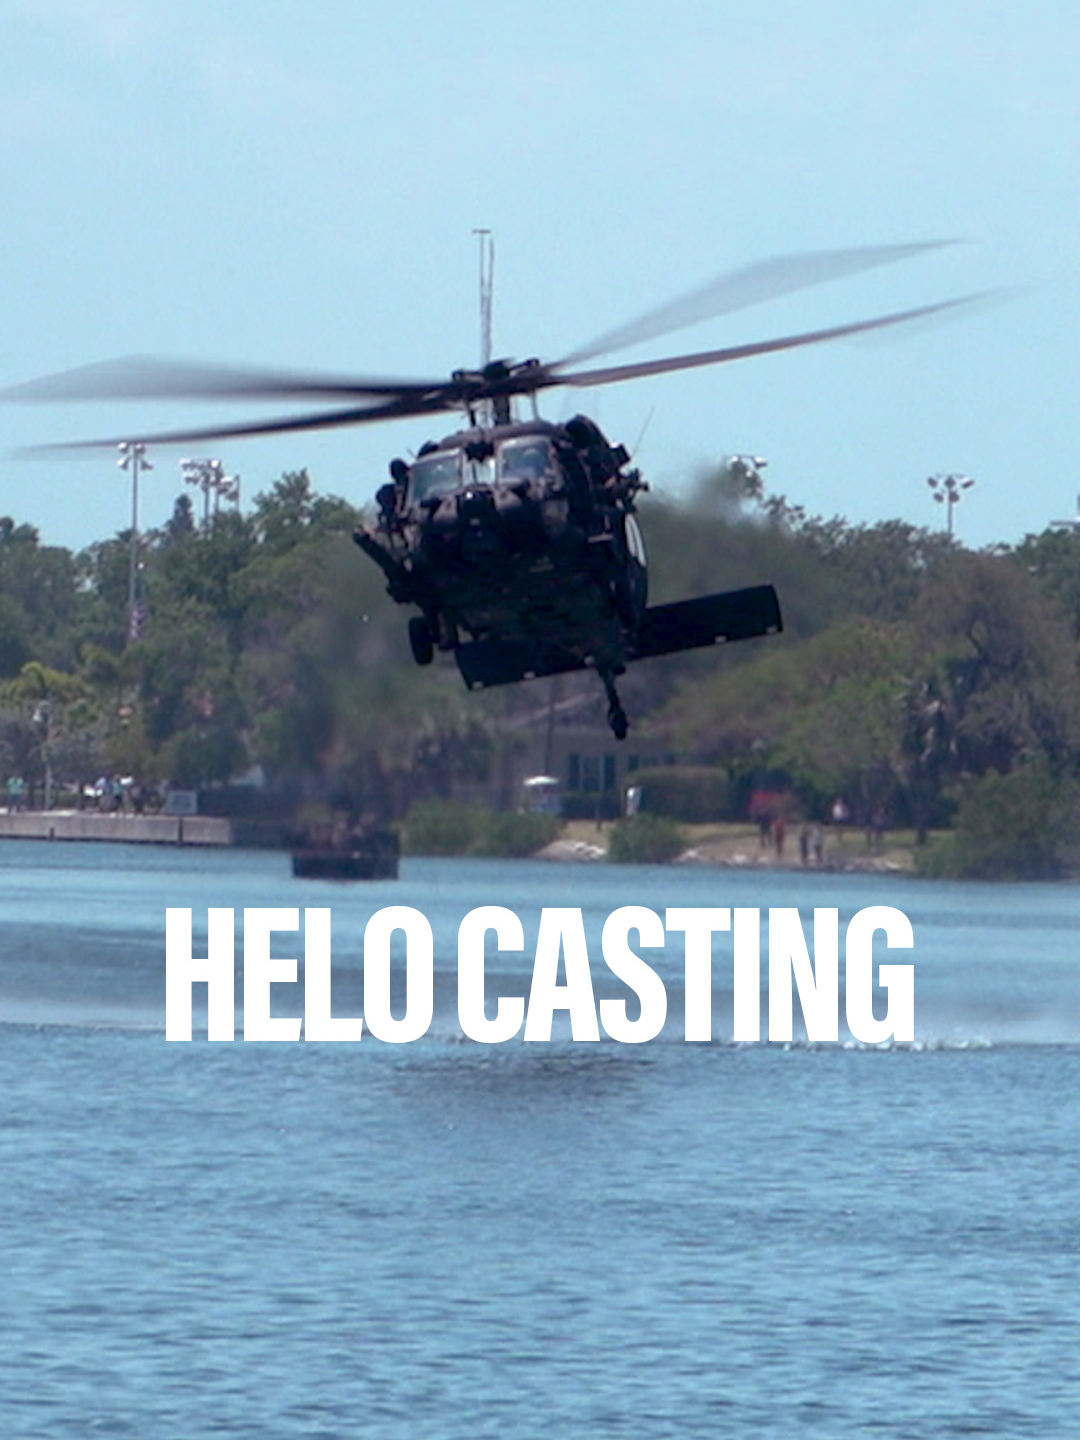 Watch Navy SEALs leap from a Black Hawk helicopter during helo-casting demonstration at SOF Week #sofweek#specialops#forces#navy#navyseals#seals#helicopter#blackhawk#military#defense